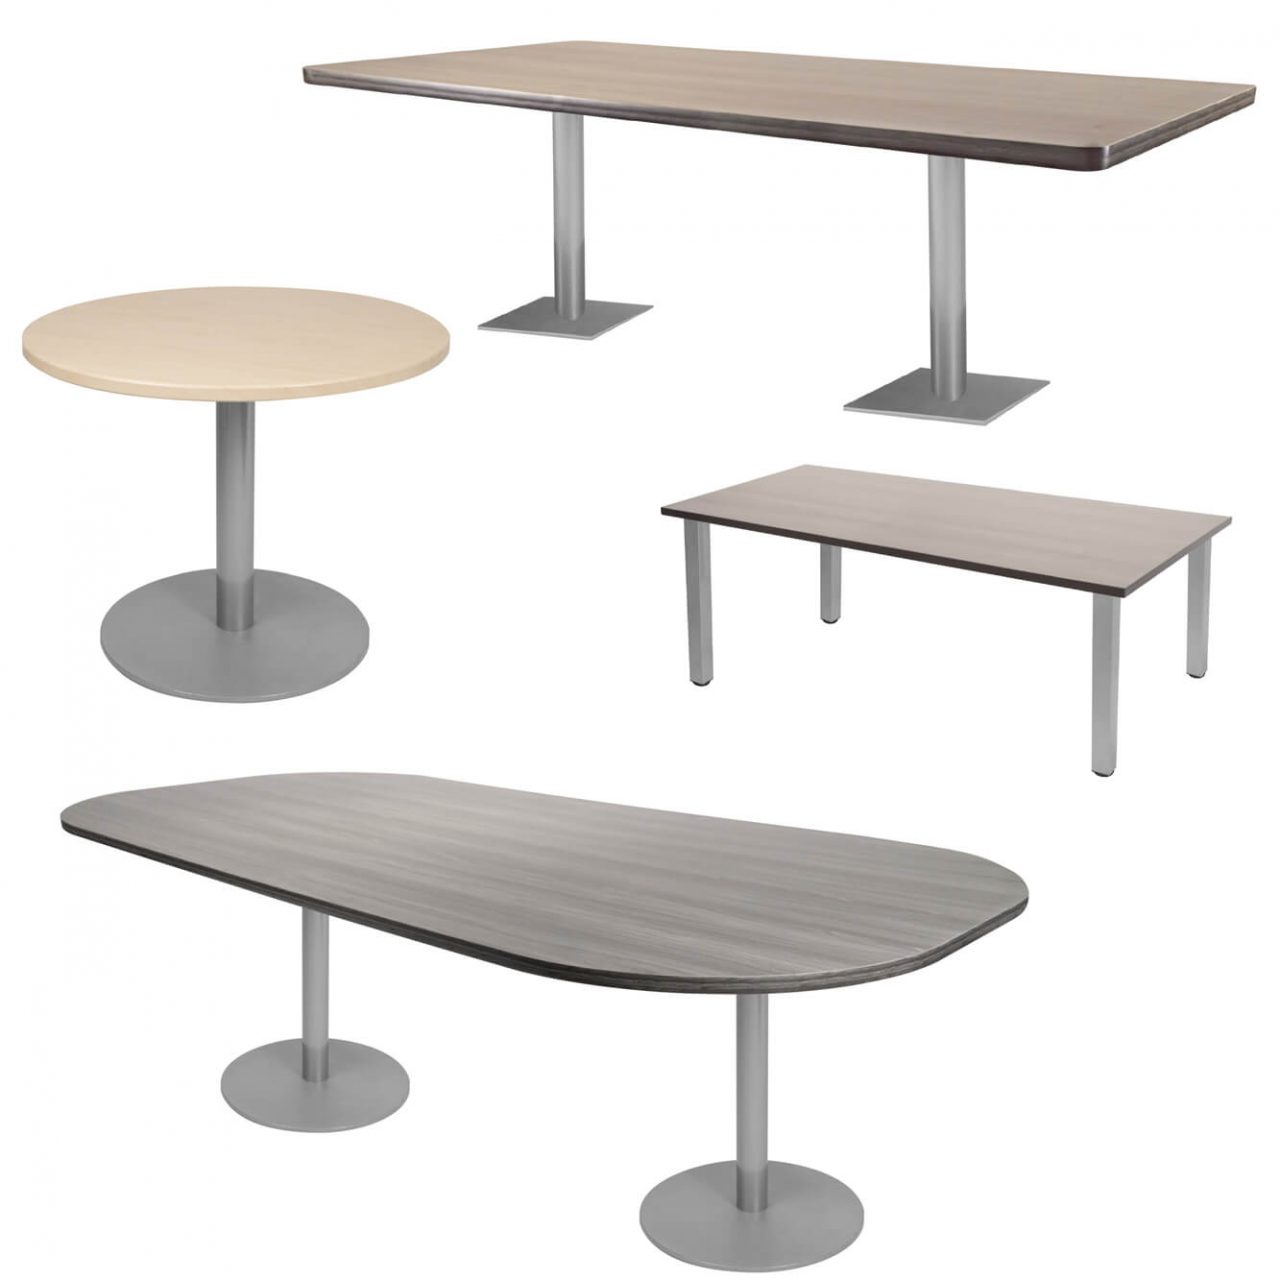 Fixed-height work and meeting tables